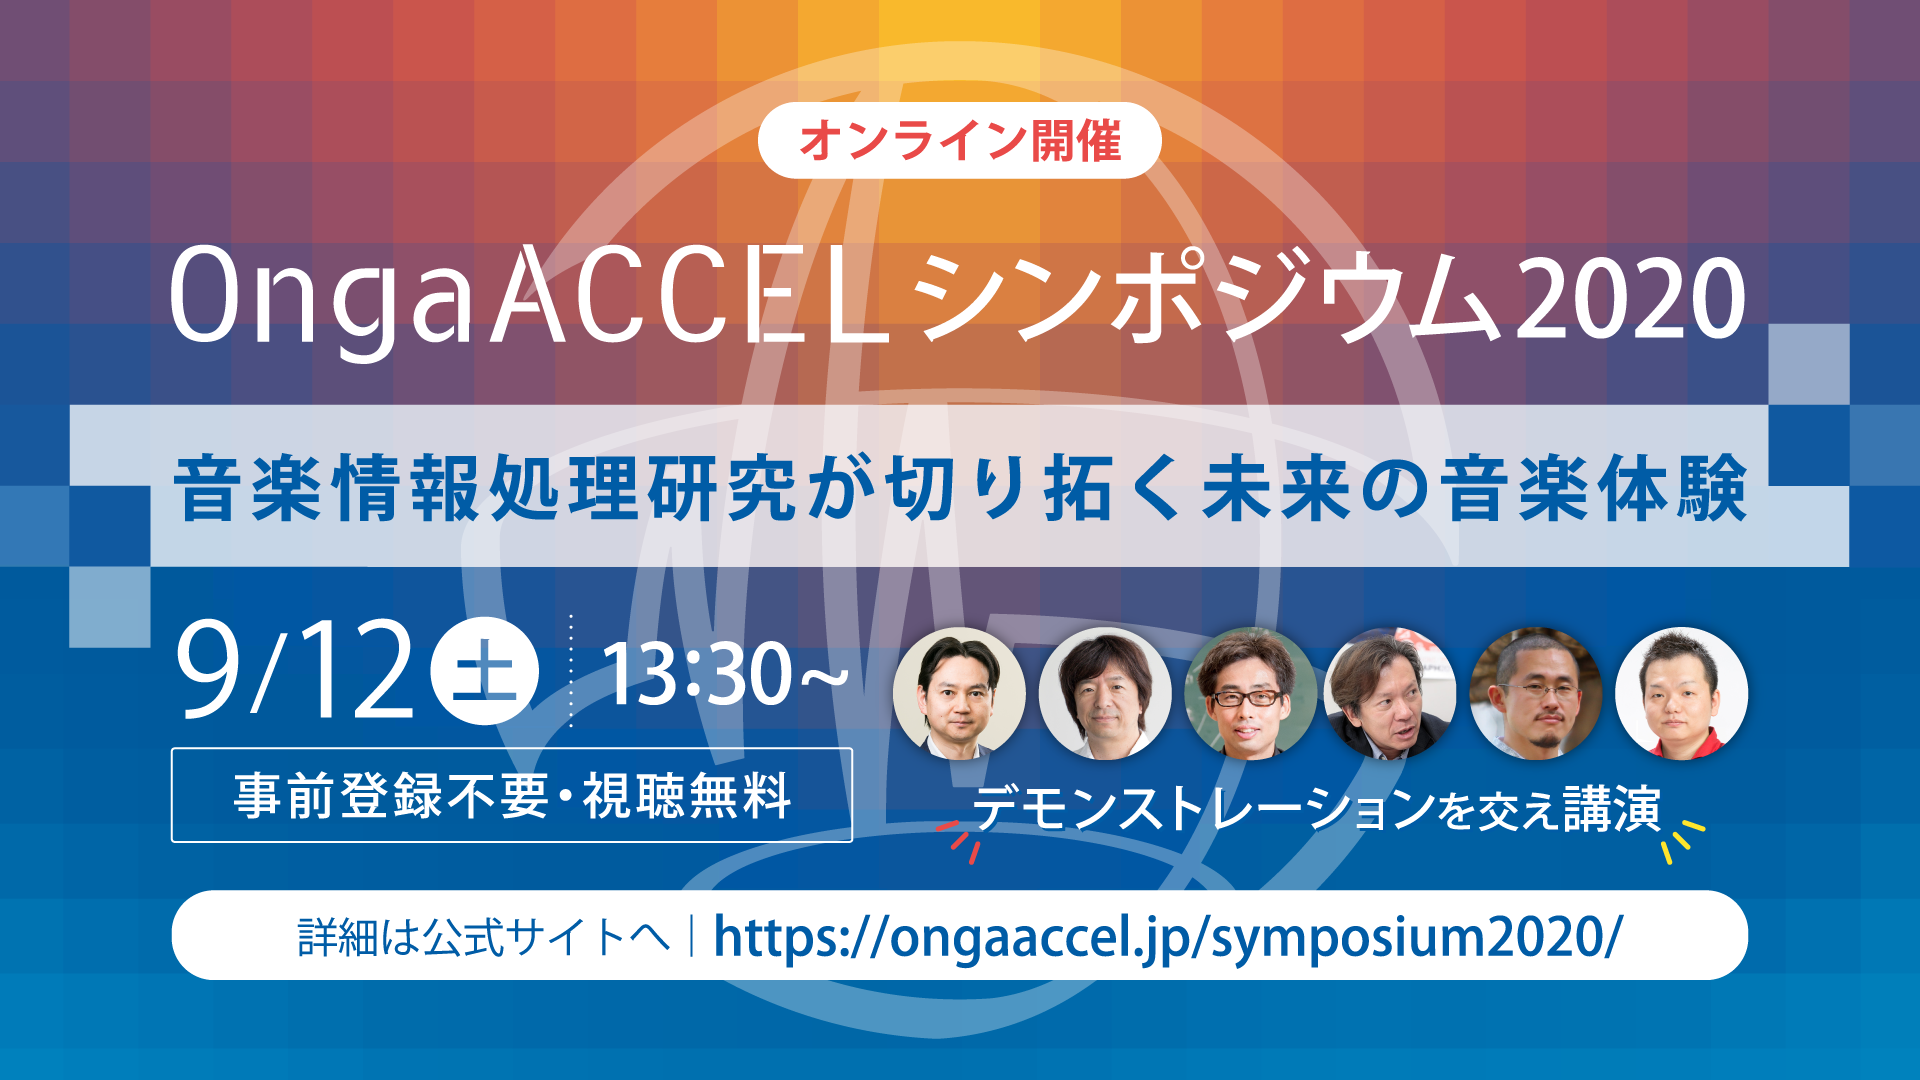 OngaACCEL Symposium 2020